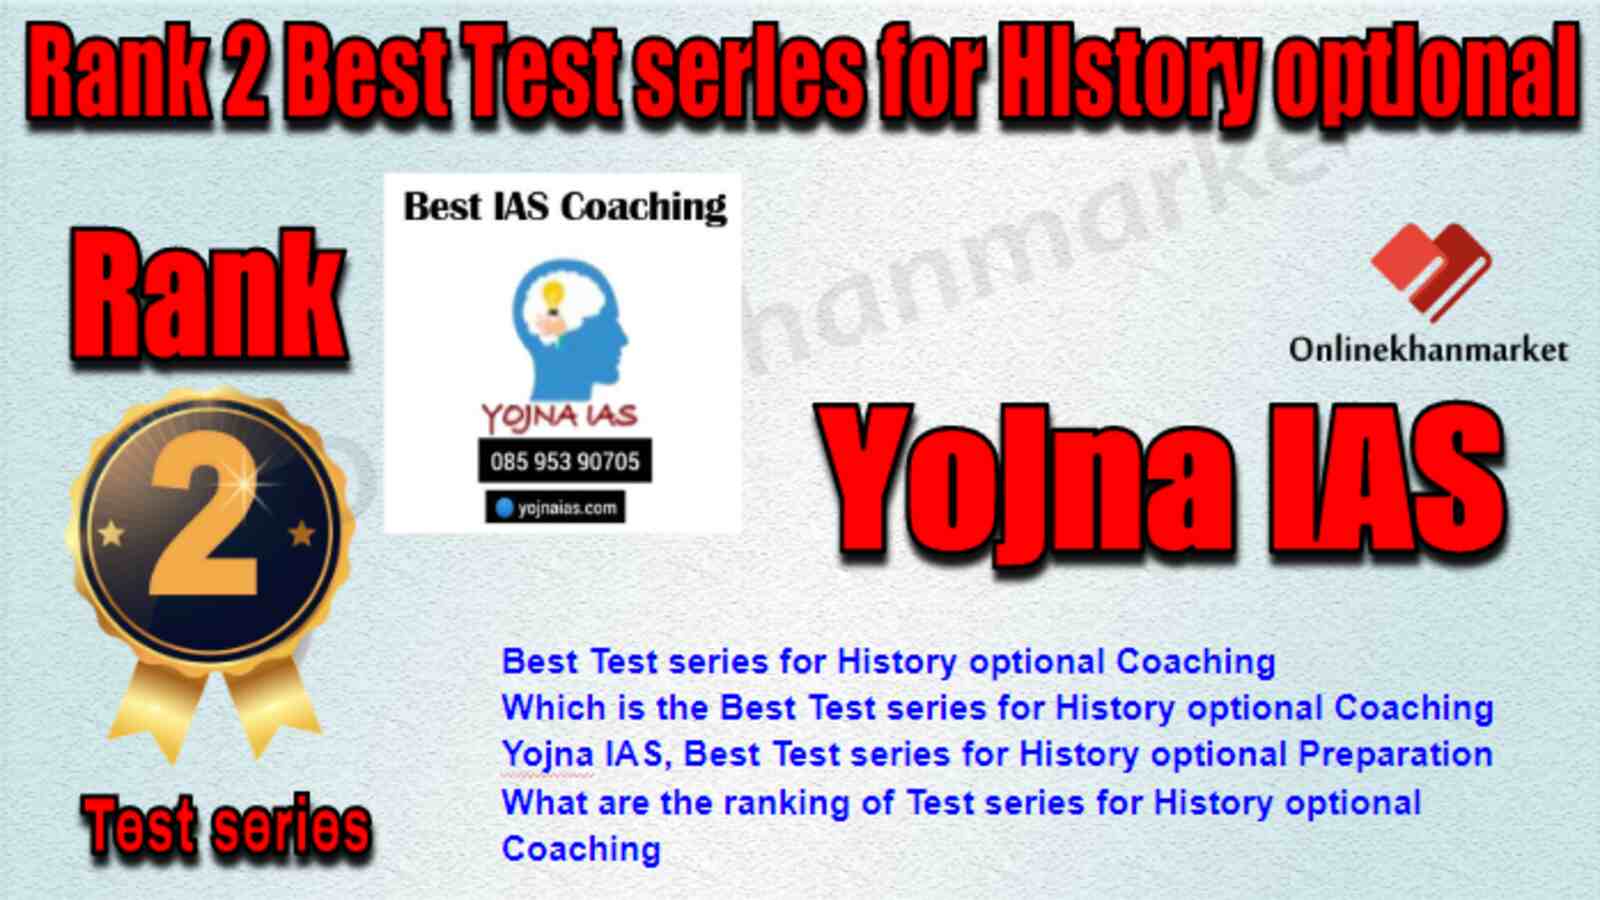 Rank 2 Best Test series for History optional